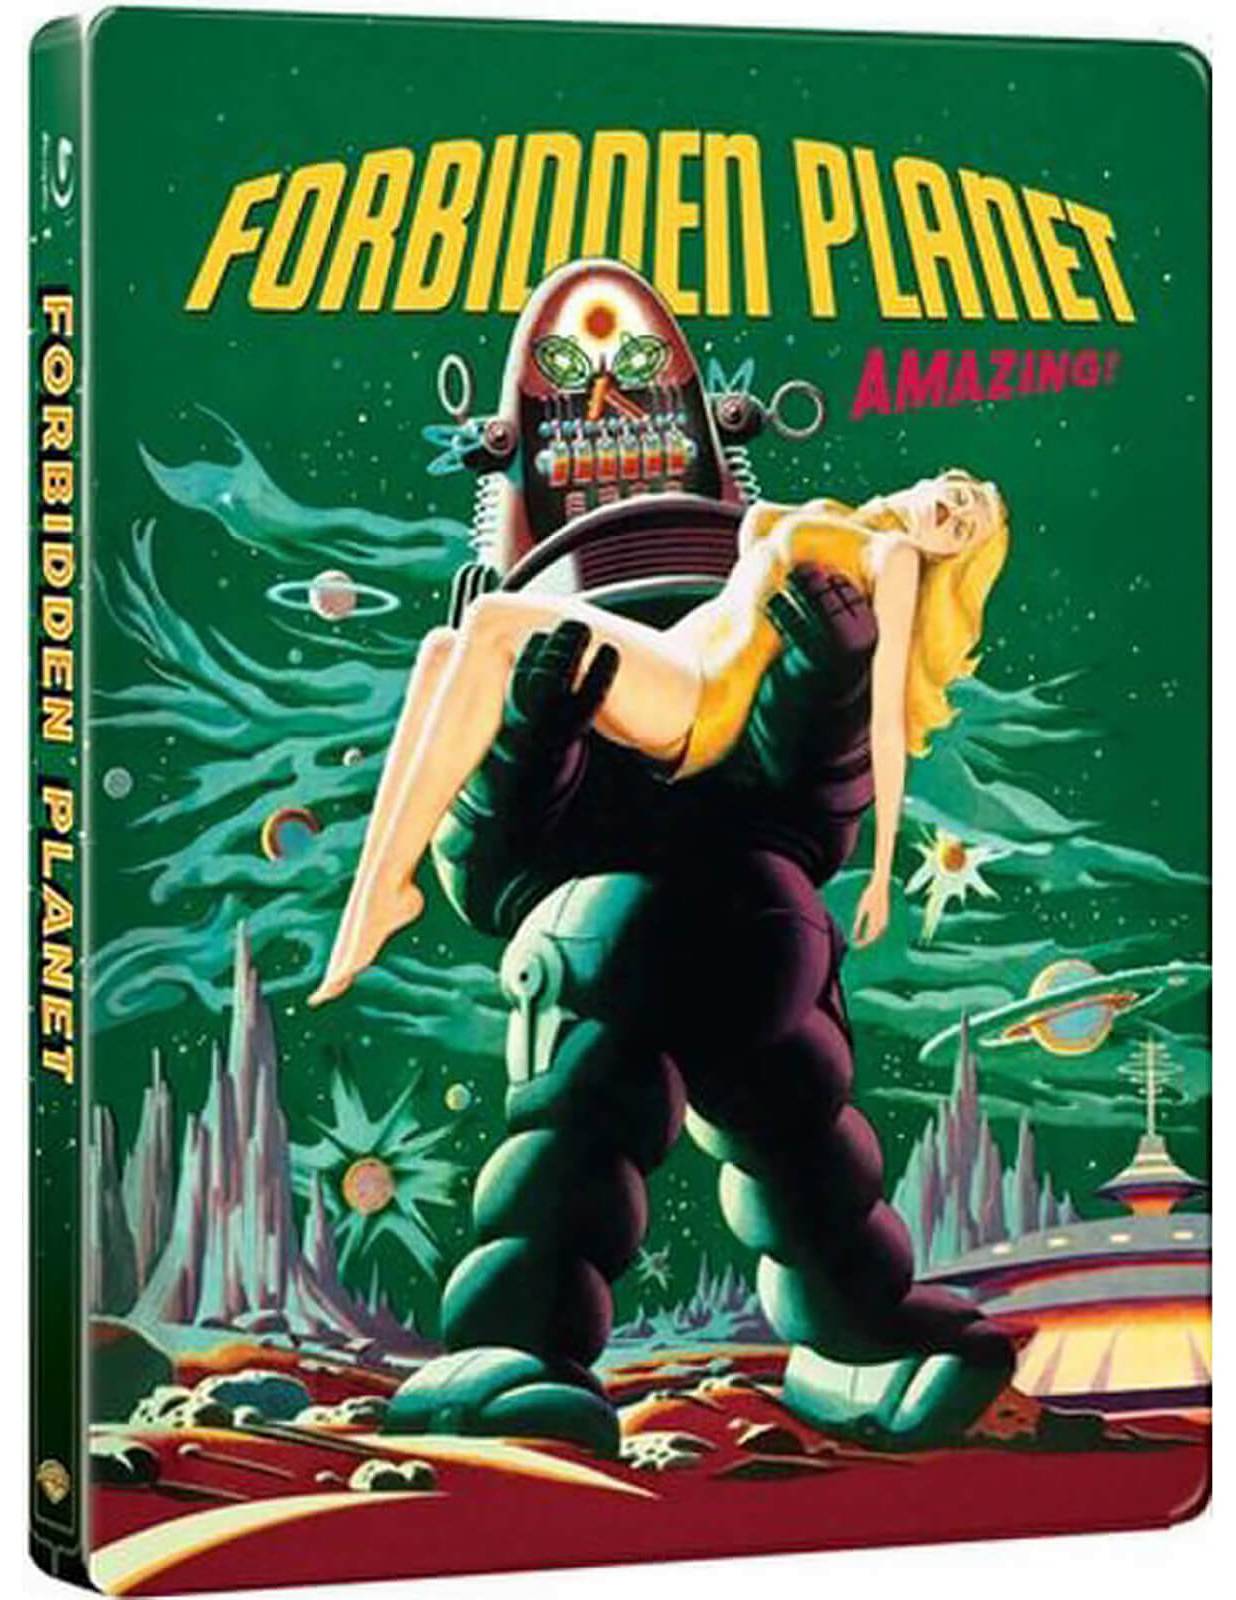 Forbidden Planet 1956 Vintage Science Fiction Movie Poster – Mystery Supply  Co., forbidden planet 